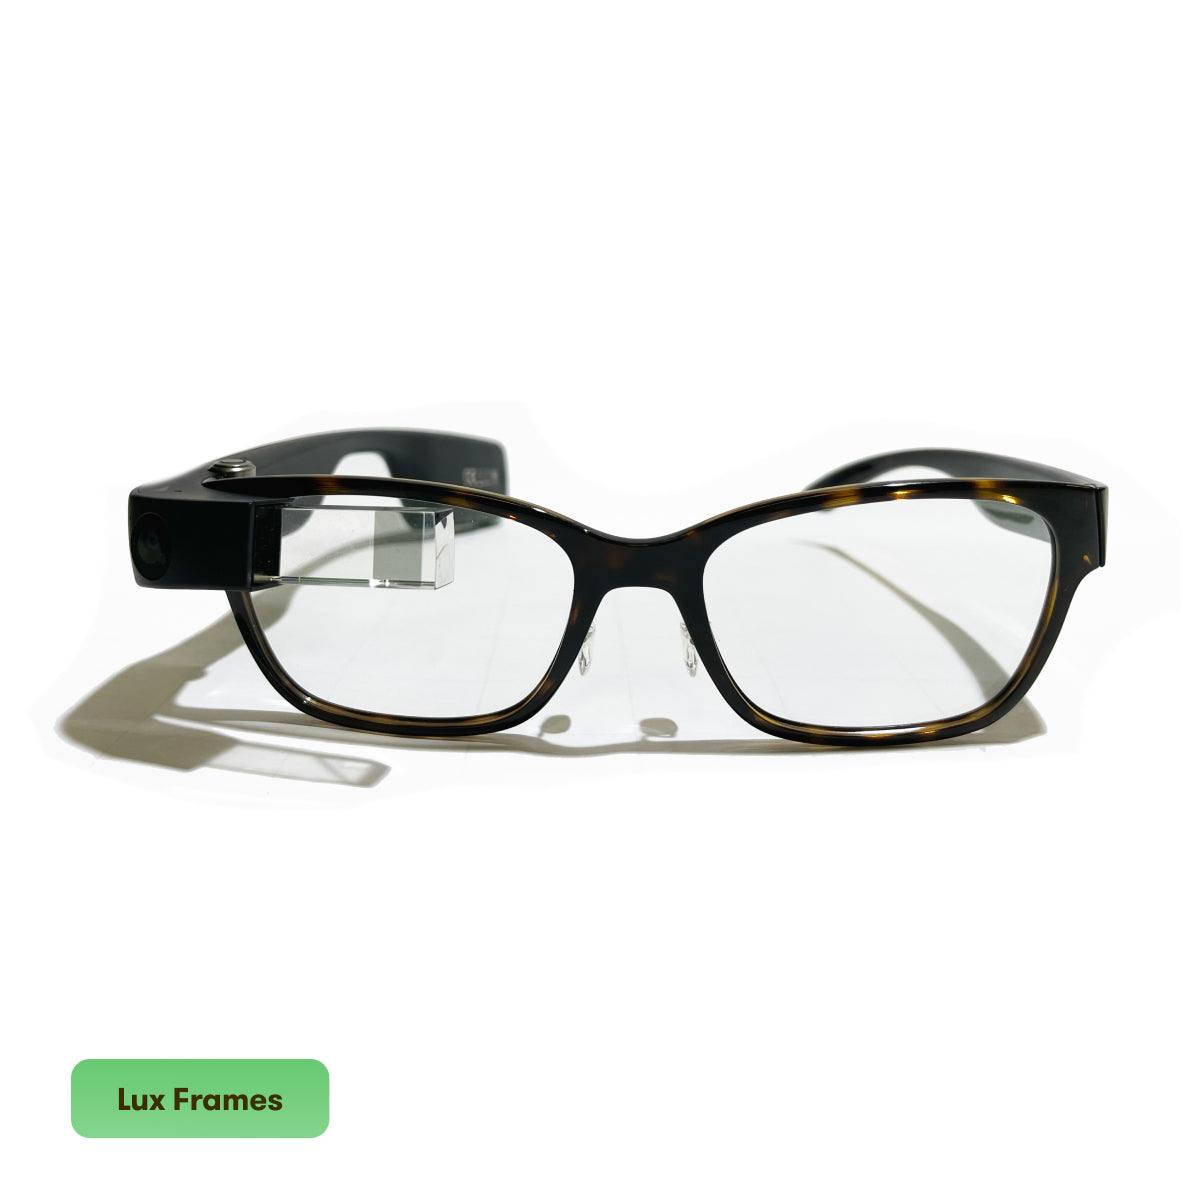 Photo of the Envision Glasses with the Lux Frames (Front view)